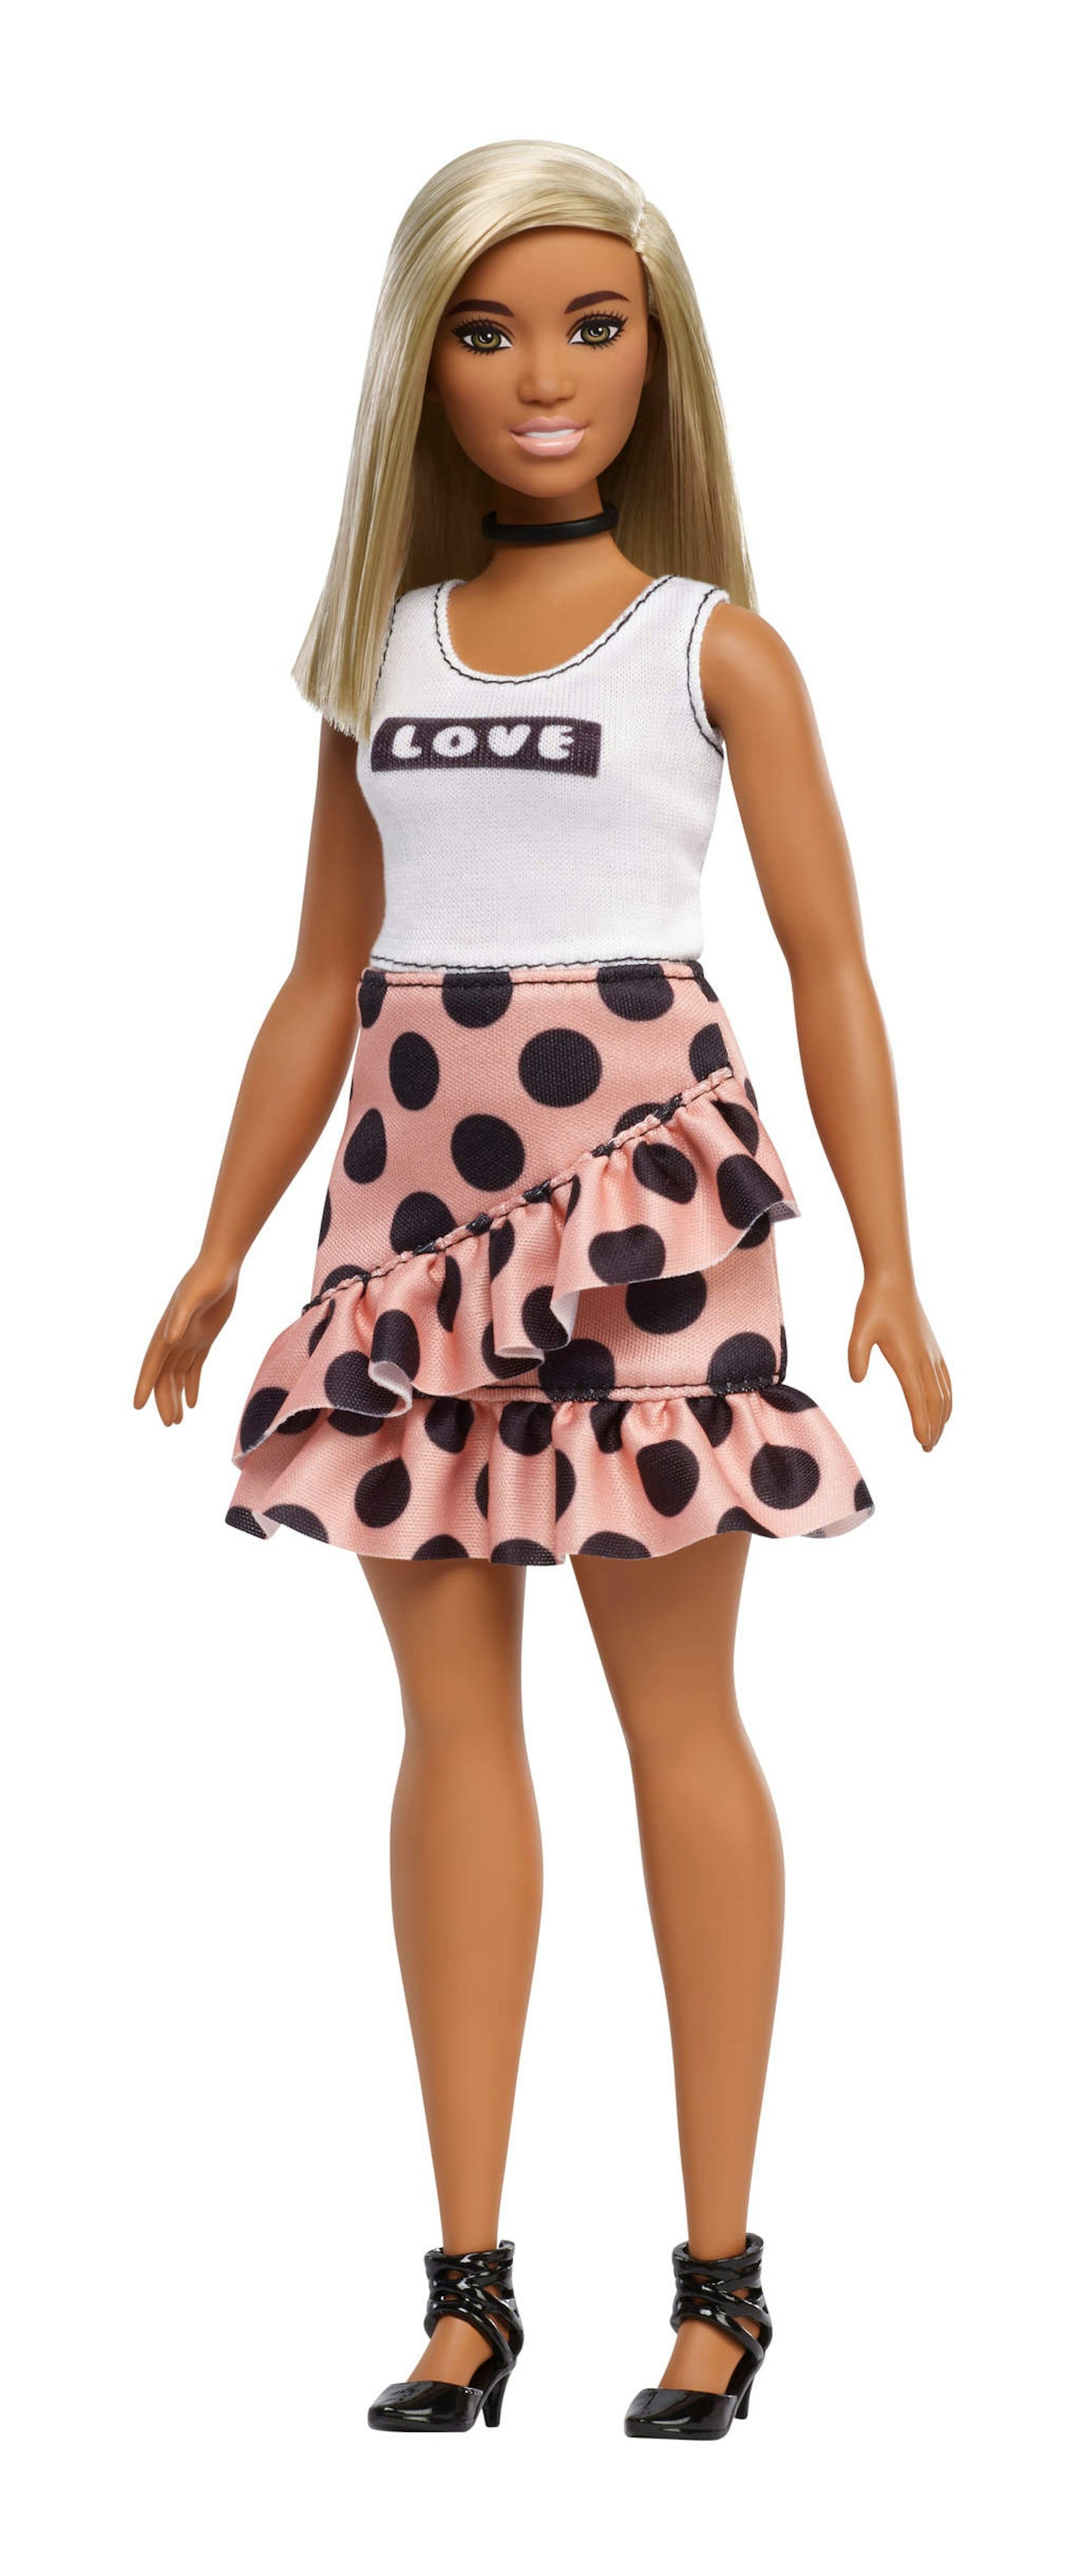 Diverse Barbie Is On It's Way And We Couldn't Be Happier